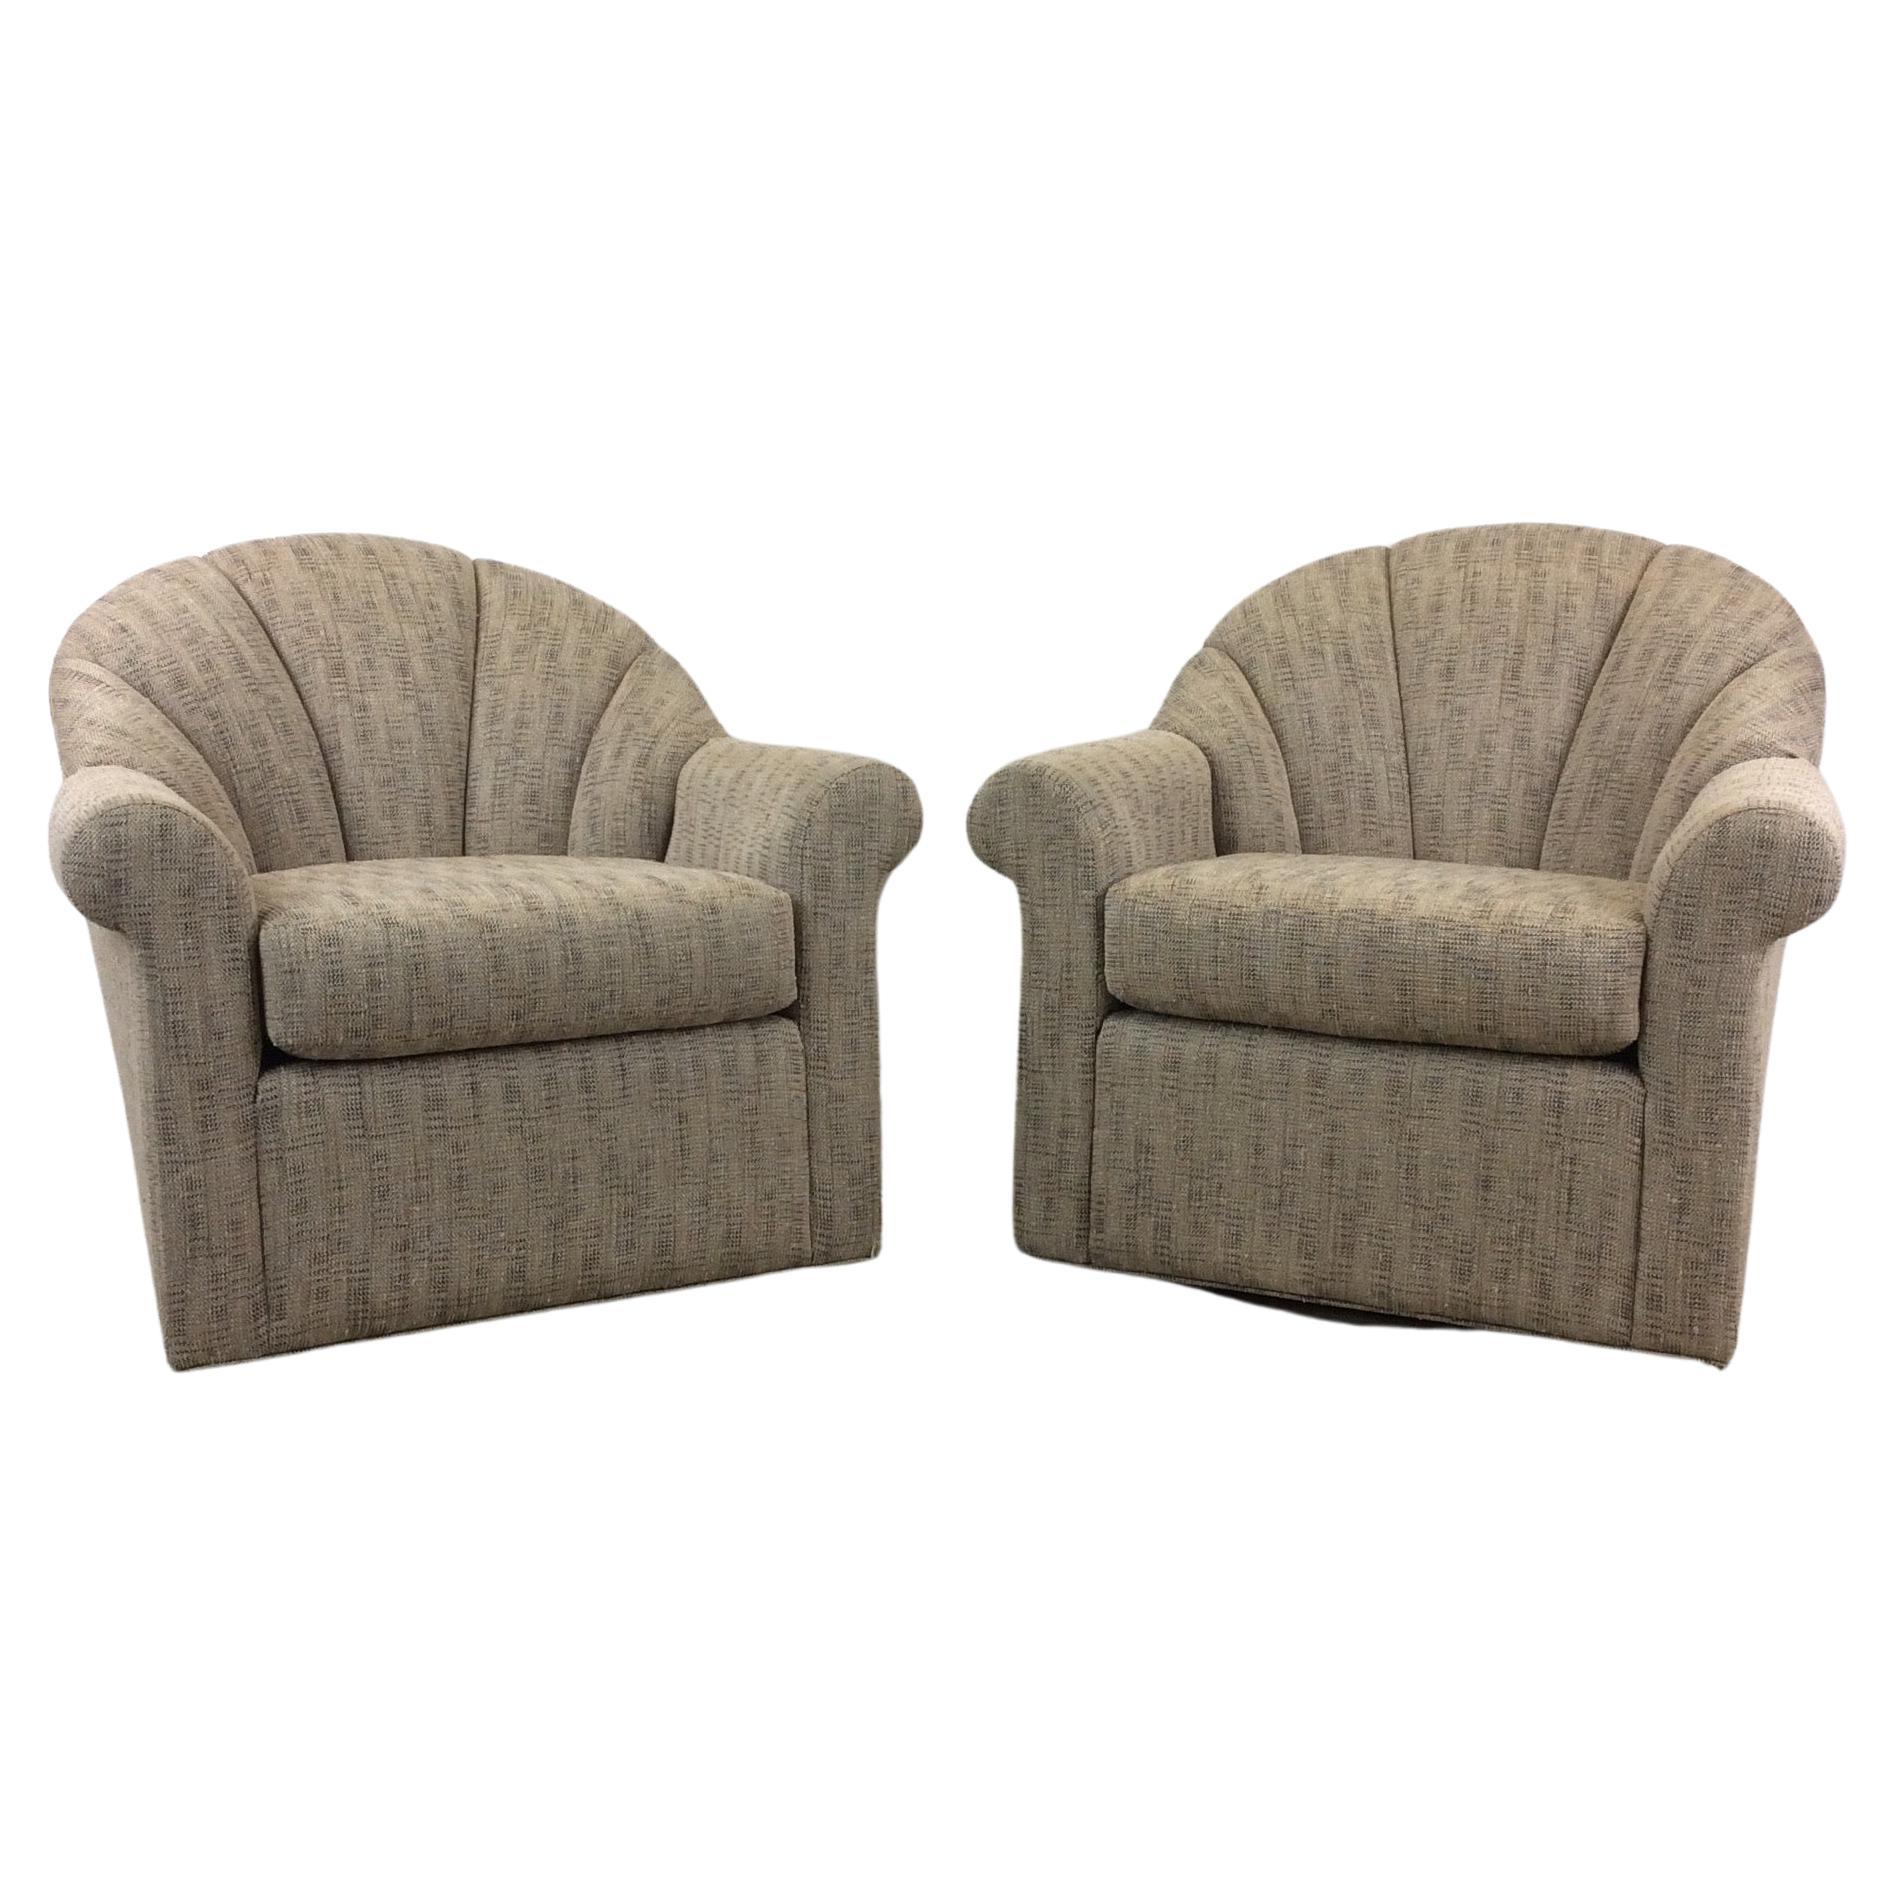 Pair of Vintage Scalloped Back Club Chairs with Swivel Base